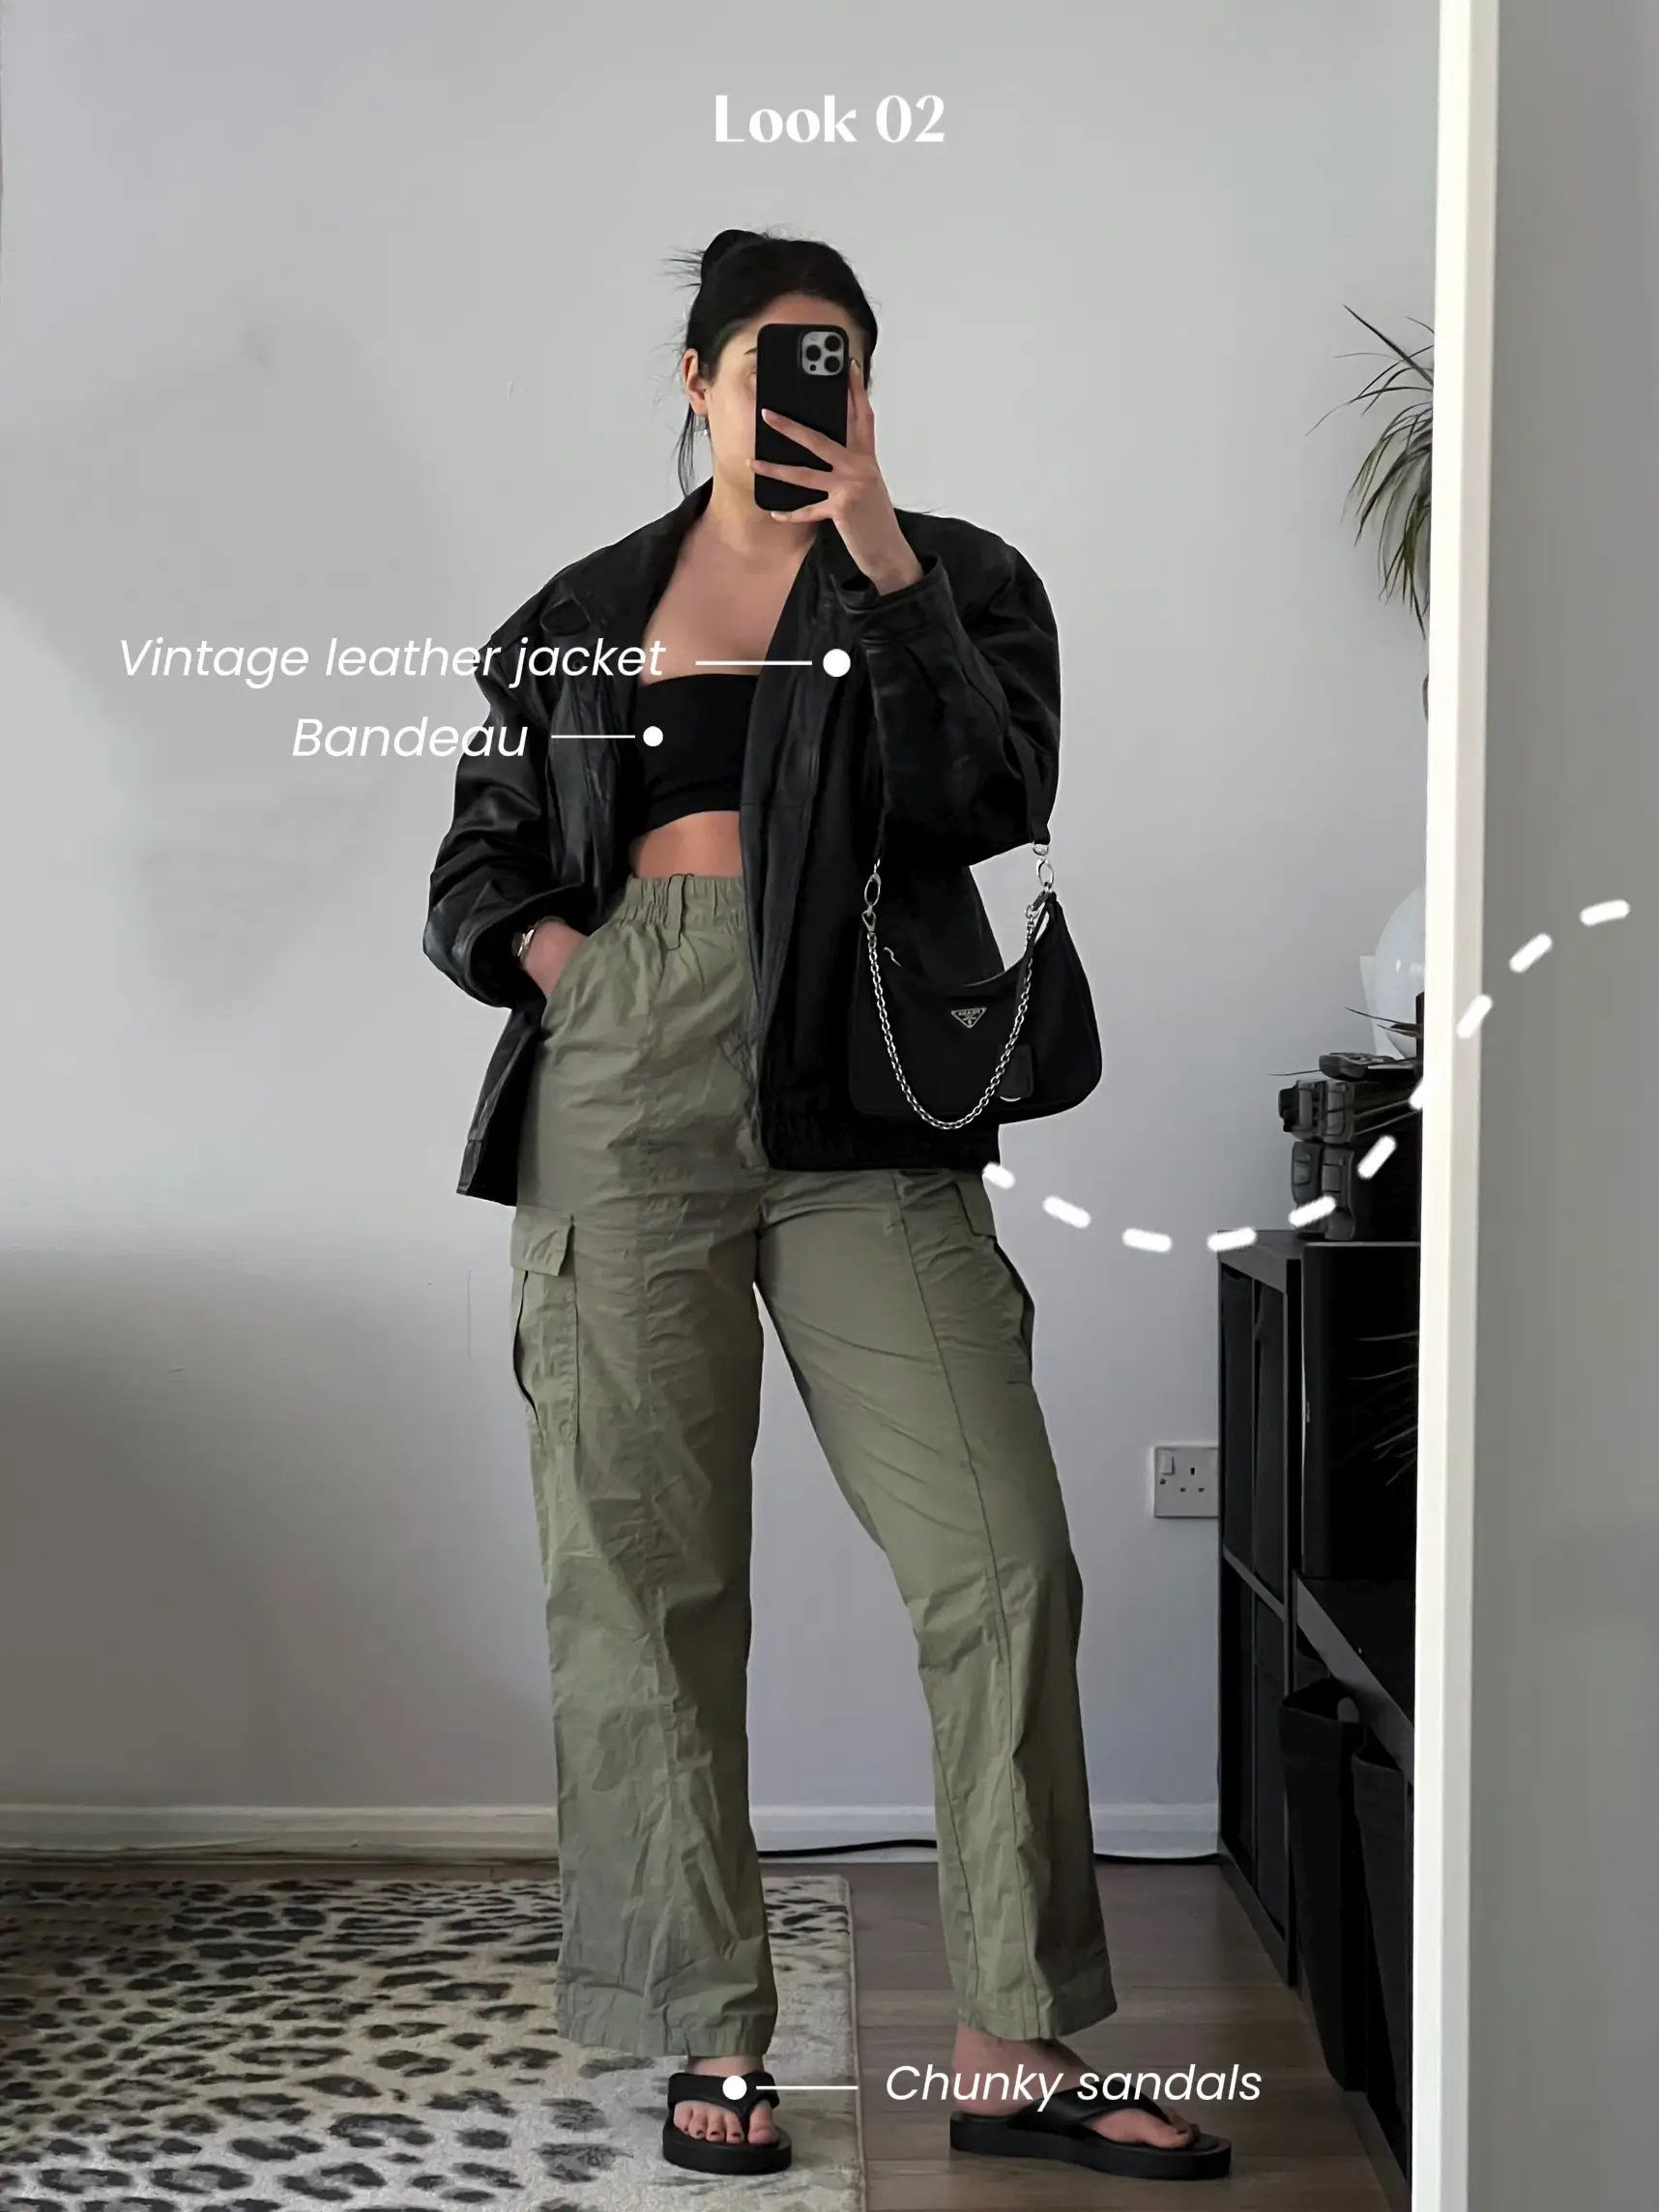 The BEST Zara Cargo pants for Spring 🌷✨, Gallery posted by Rachel Lakin